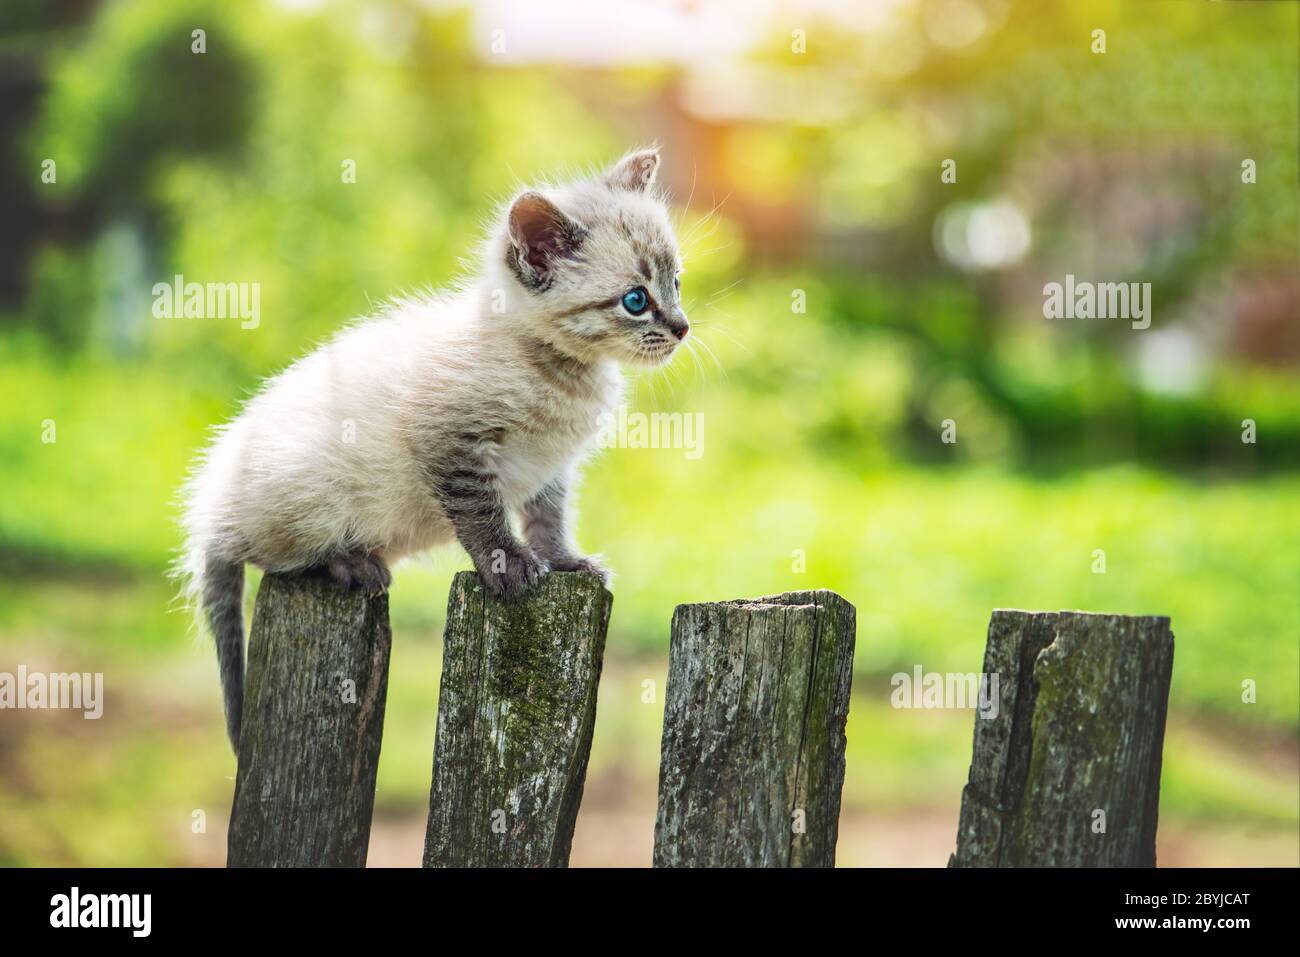 Small kitten cat with blue ayes on wooden fence on garden closeup. Animal pets photography Stock Photo